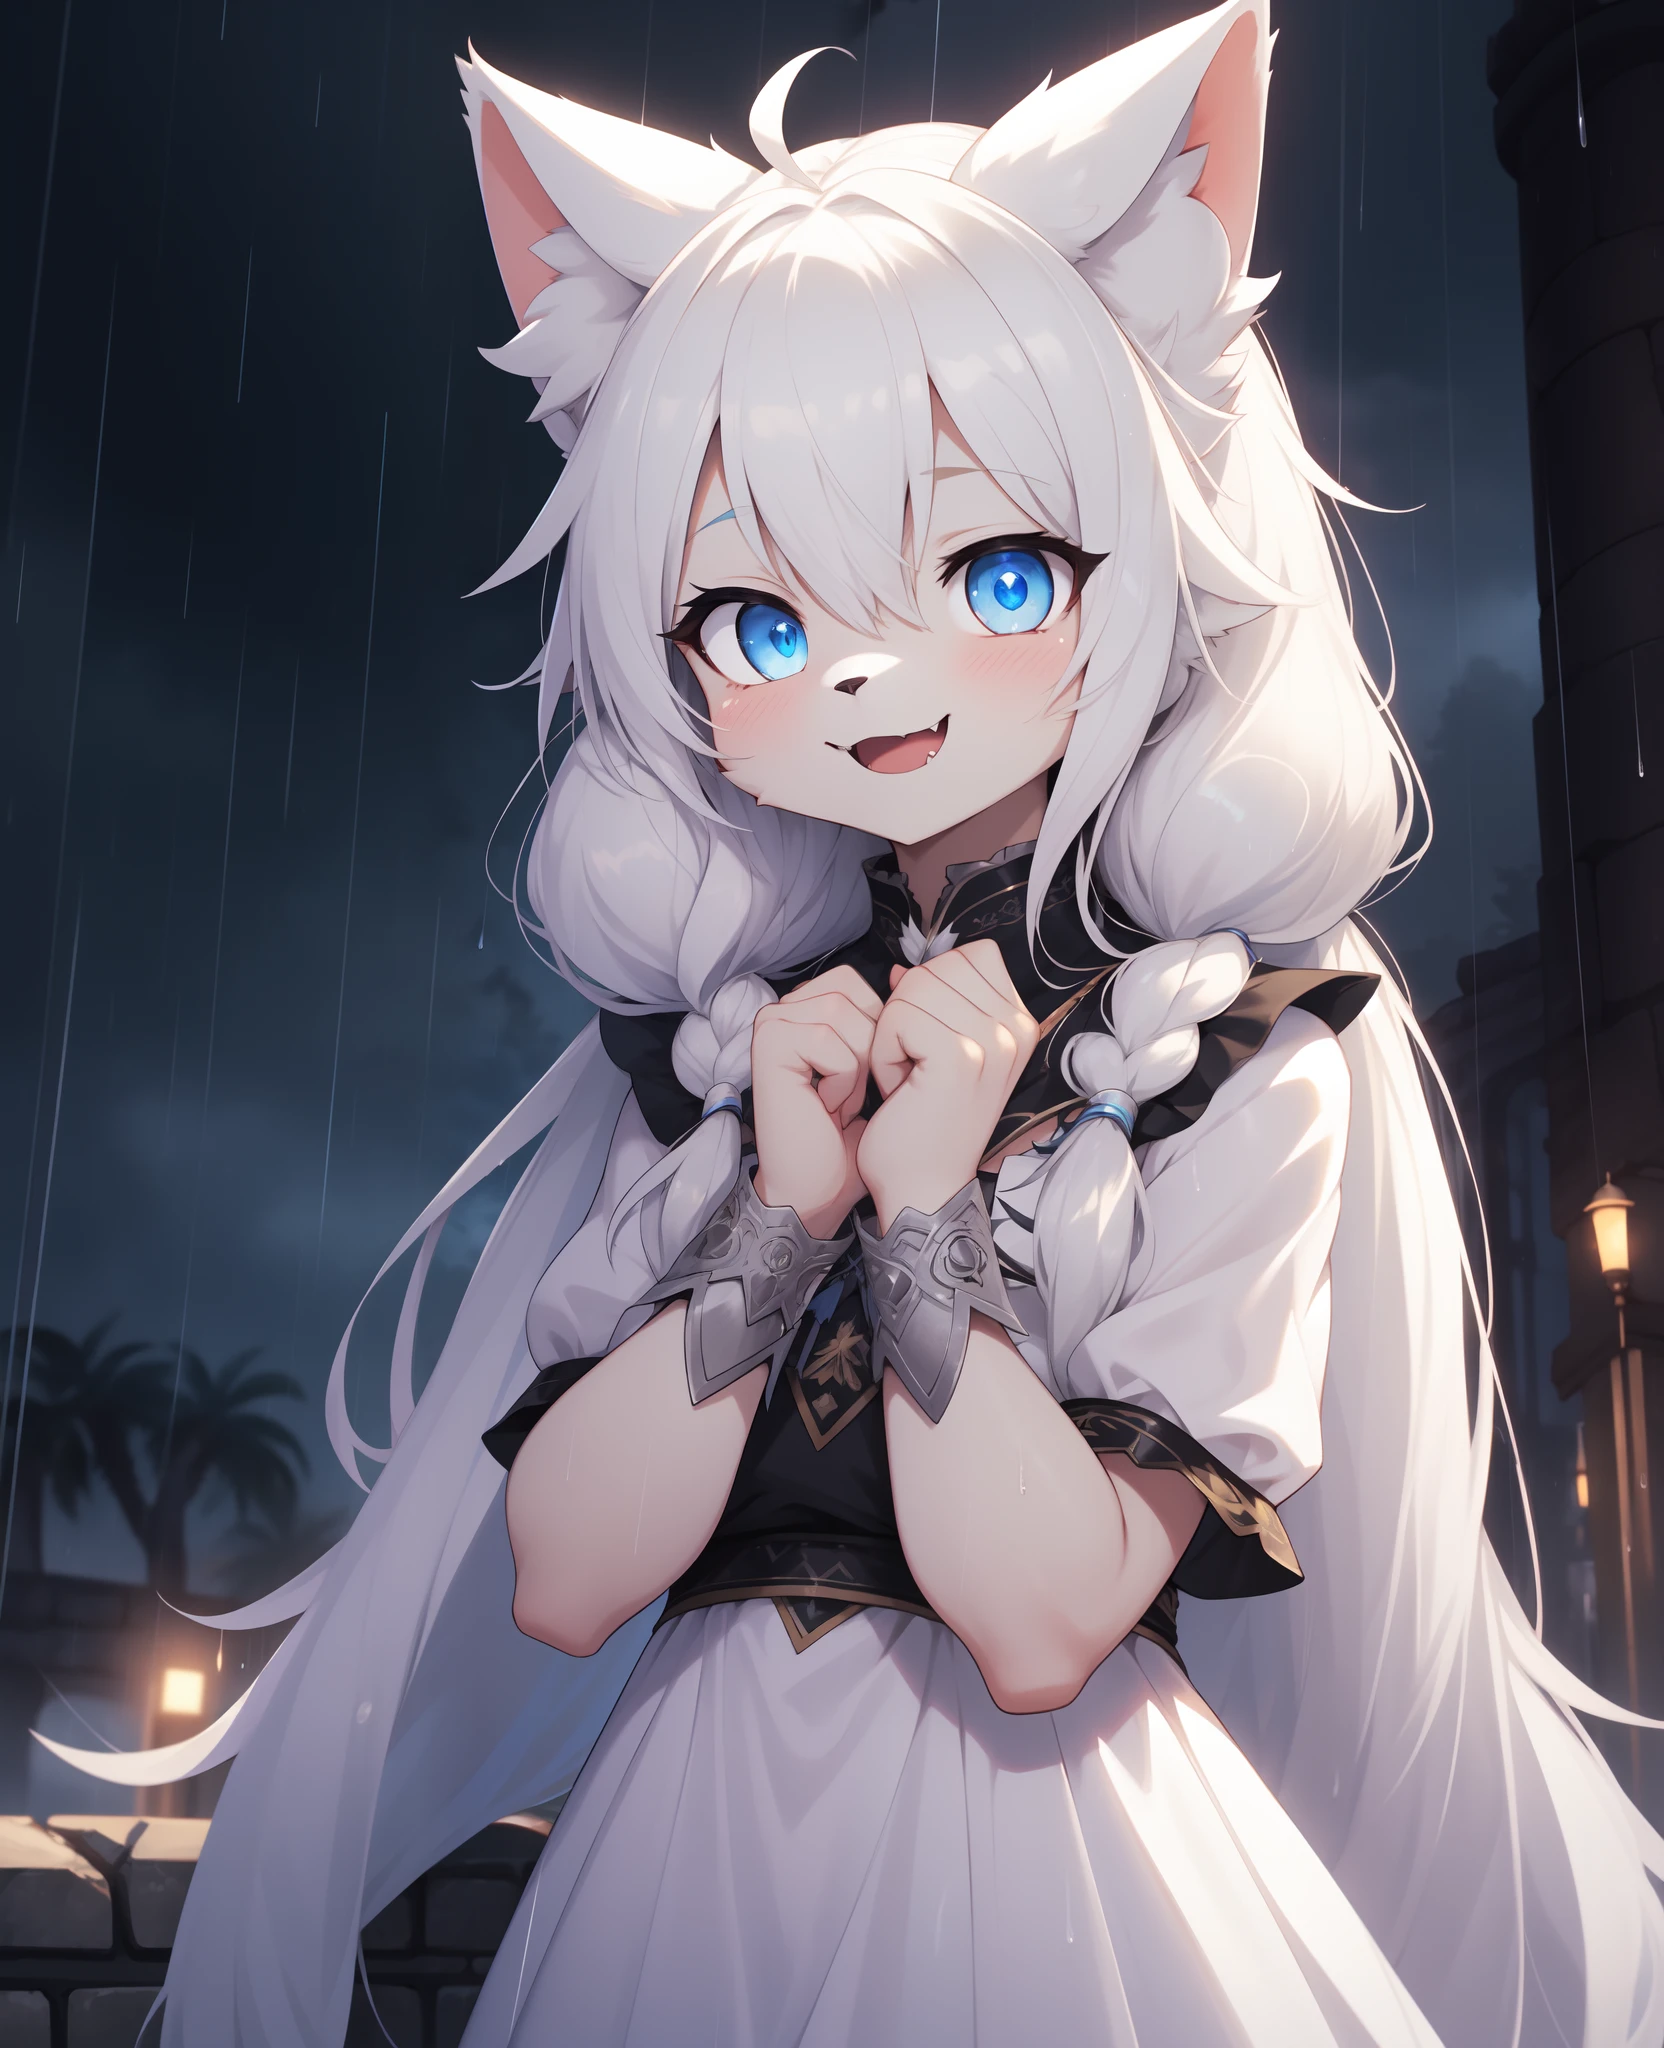 Cat Girl，was hairy，shaggy，Skin fur，White fur，Forelimb hands，hair splayed out，White ears，White face fur，White hair, hair splayed out, Shiny hair，Long hair，Hairline, low twintails，blue eyes，Super cute face，happy, full-face blush, smiley，Empty eyes， Fangs，daggers，bat hair ornament，White dress，Ambient light，Ultra-fine fur，Volumetric eye, bangs, light and darkcontrast, ultra high def, Masterpiece, Super detail，Ruins background，crow，Night，starry light，Under the rain，In the rain，Drizzle，Wet with rain，rainy outside，High quality, ultra high def, high resolution, Anatomically correct